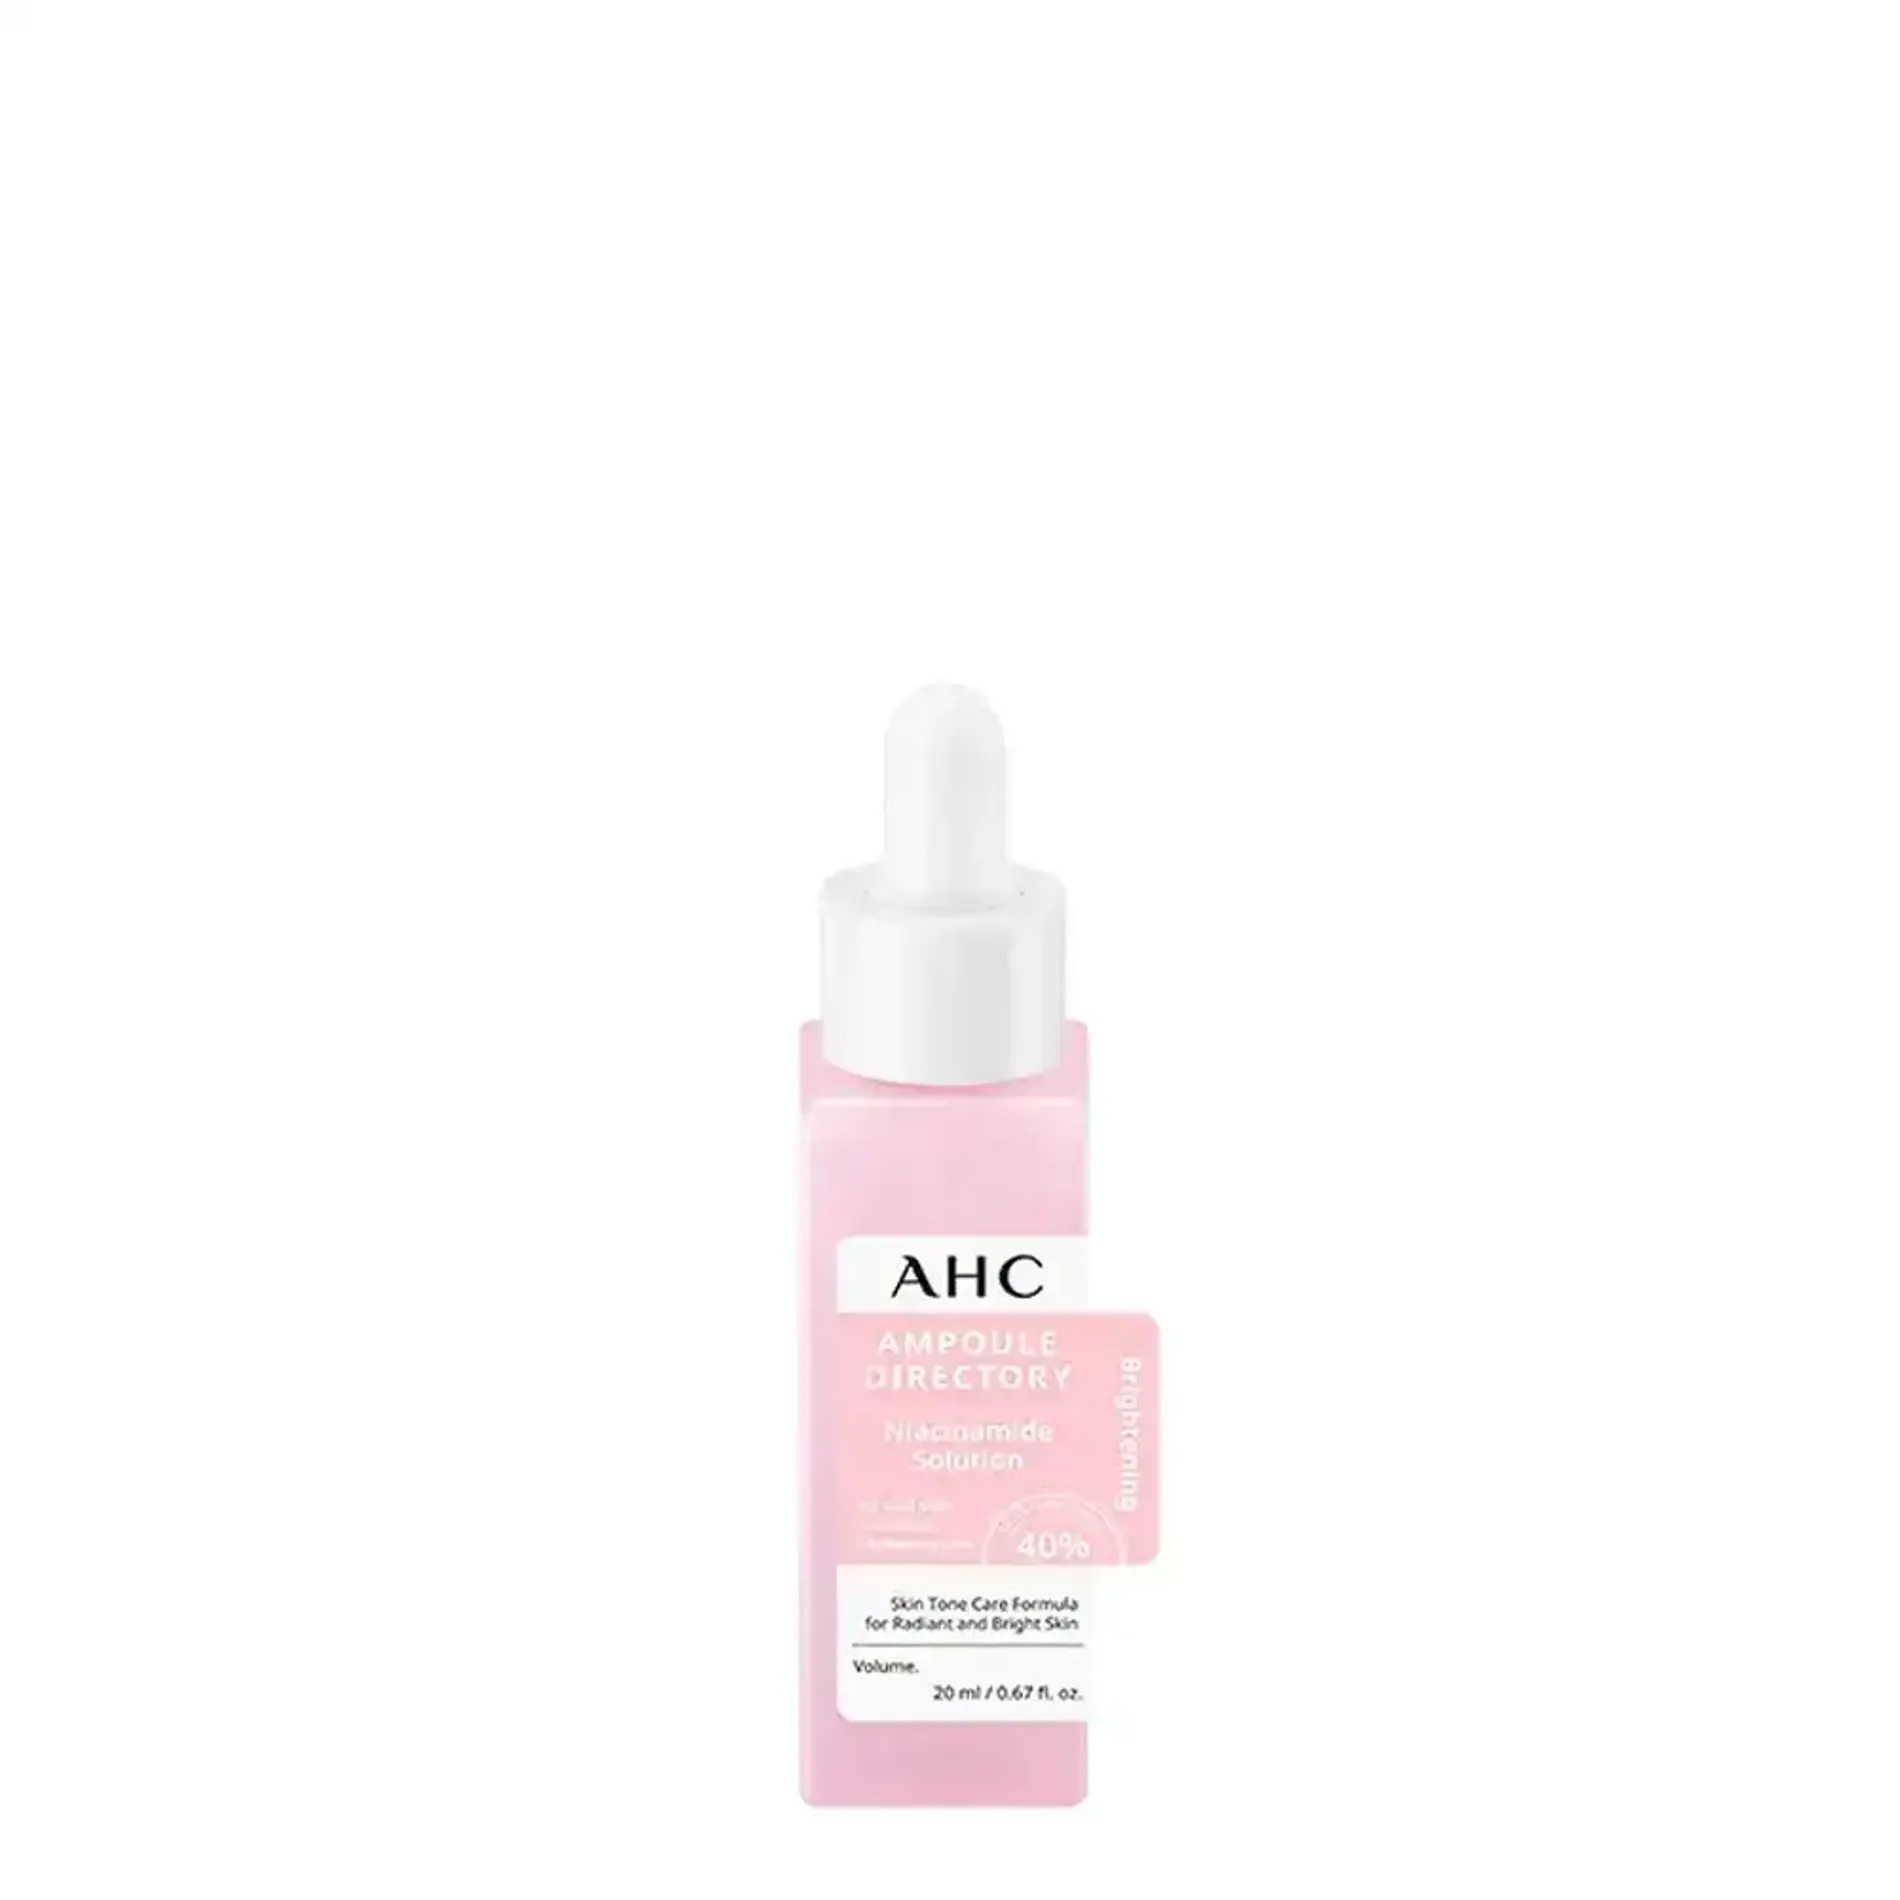 tinh-chat-duong-sang-da-ahc-ampoule-directory-niacinamide-solution-20ml-1